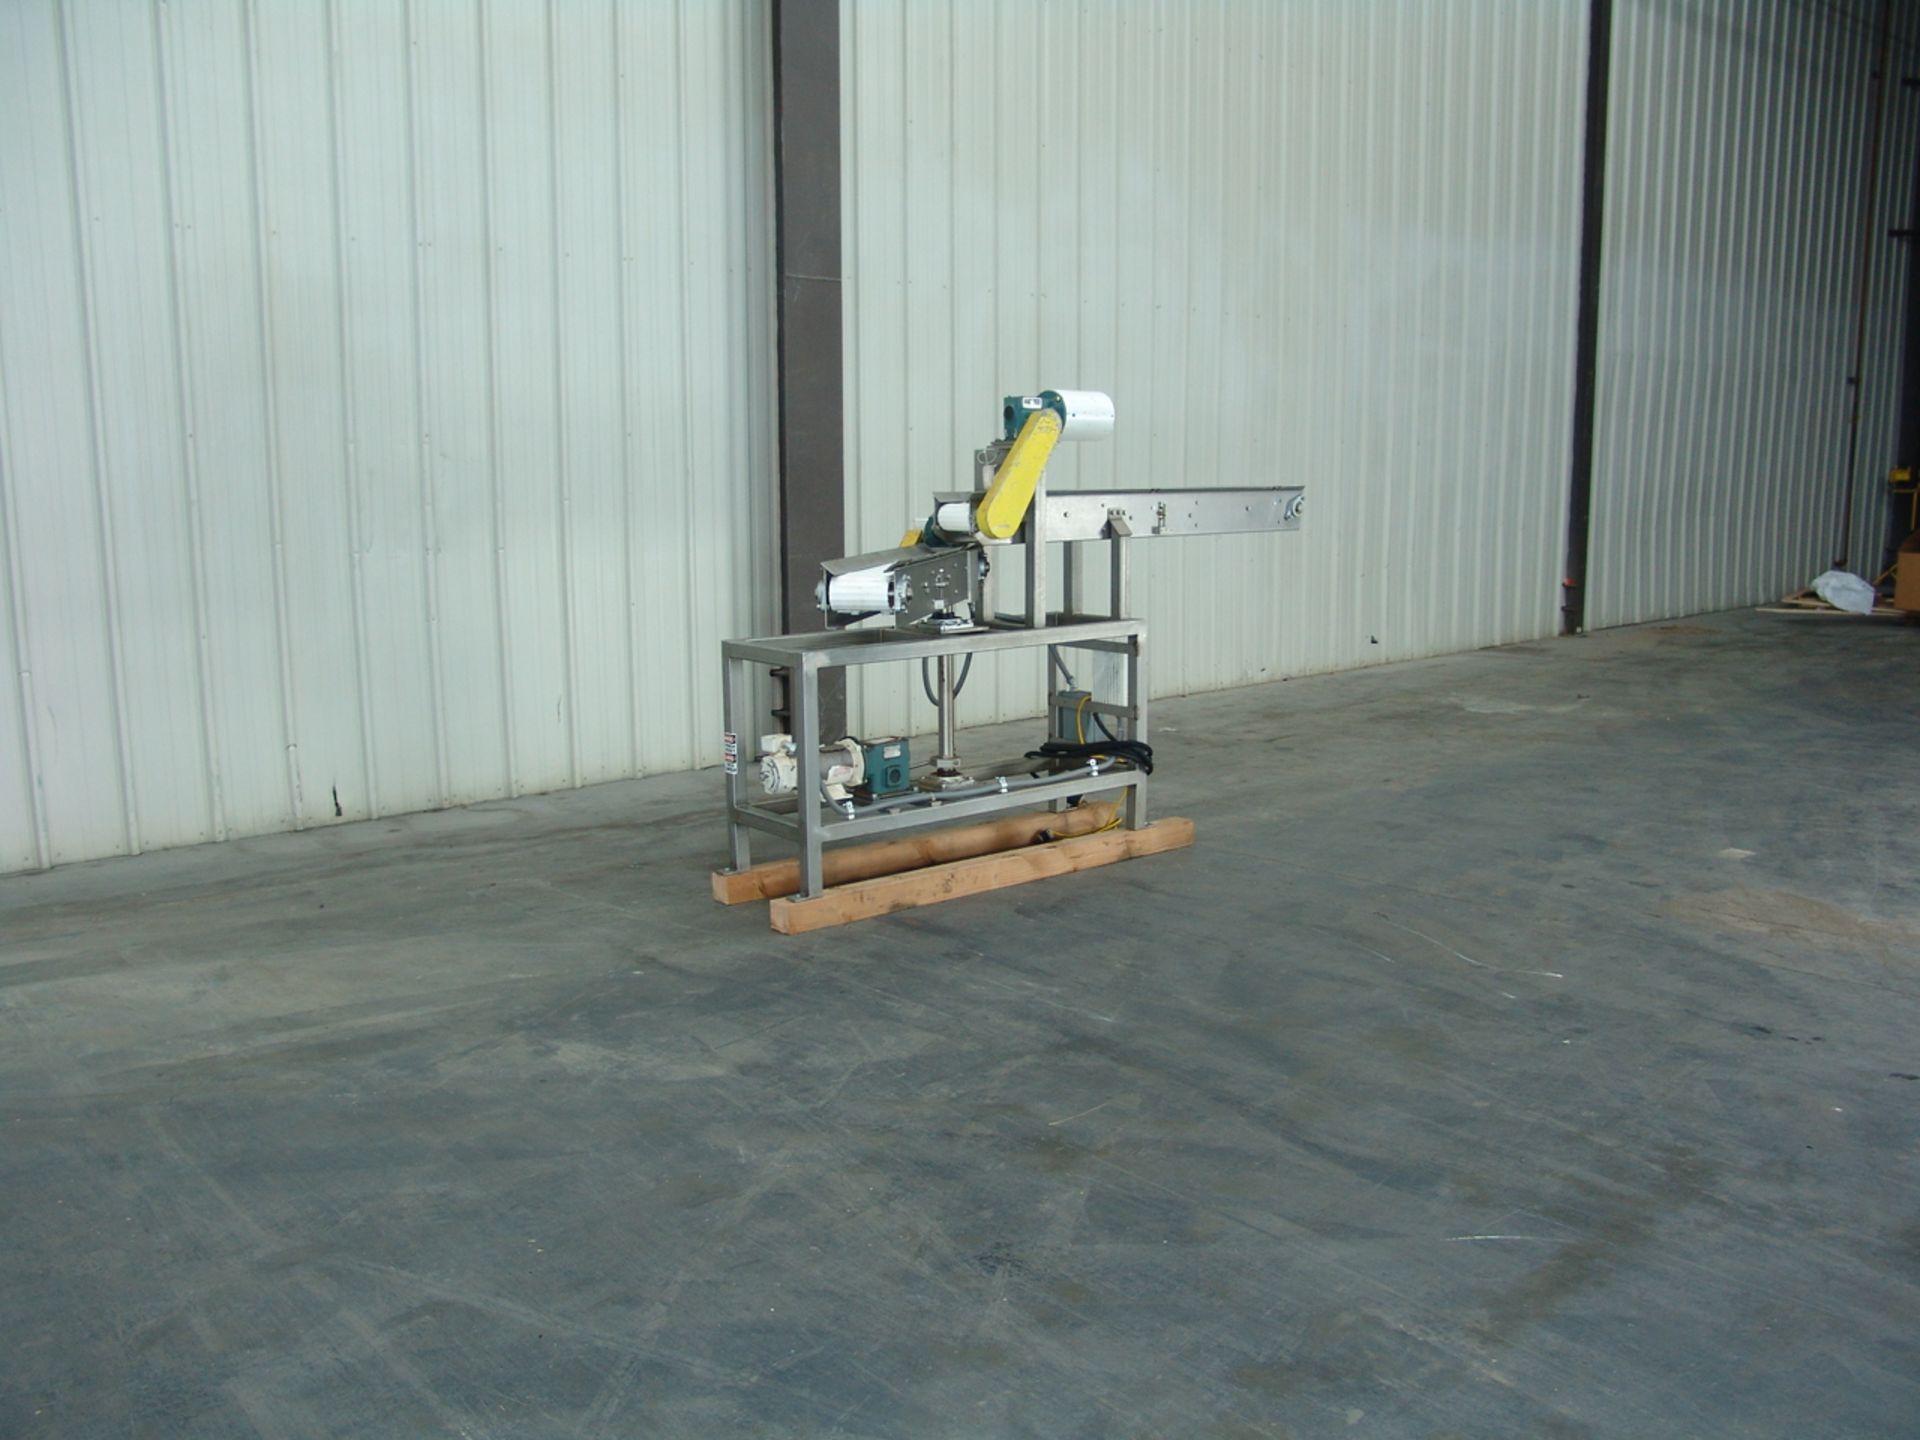 Reciprocating Conveyor To Distribute Product (Rigging Fee - $125) - Image 4 of 10